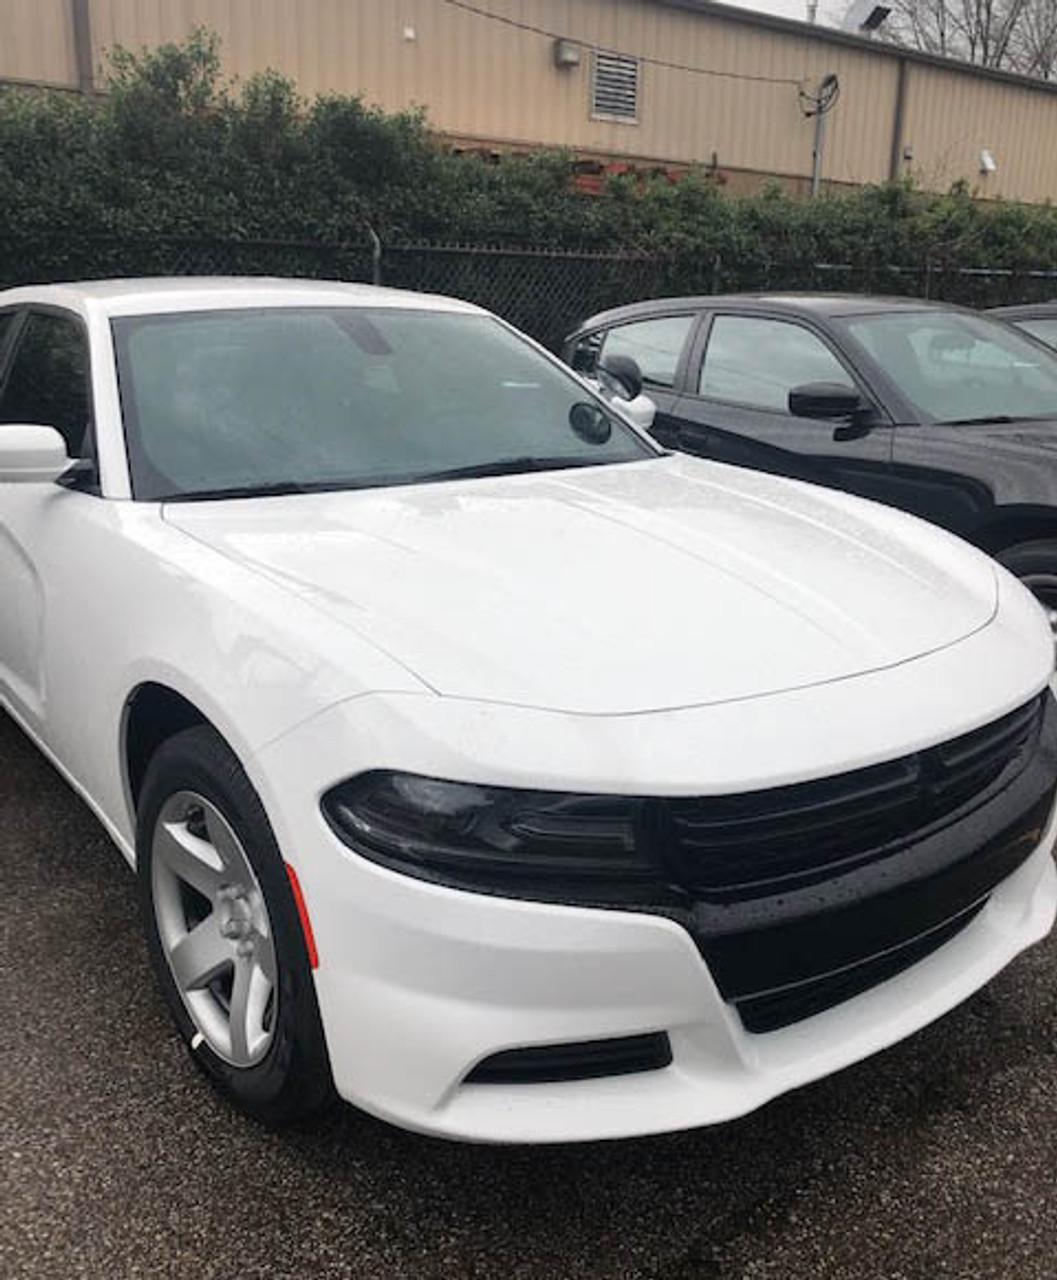 New 2023 White Dodge Charger PPV V8 RWD ready to be built as an Unmarked Patrol Package Police Pursuit Car (Emergency Lighting, Siren, Controller,  Console, etc.), WCU4, + Delivery